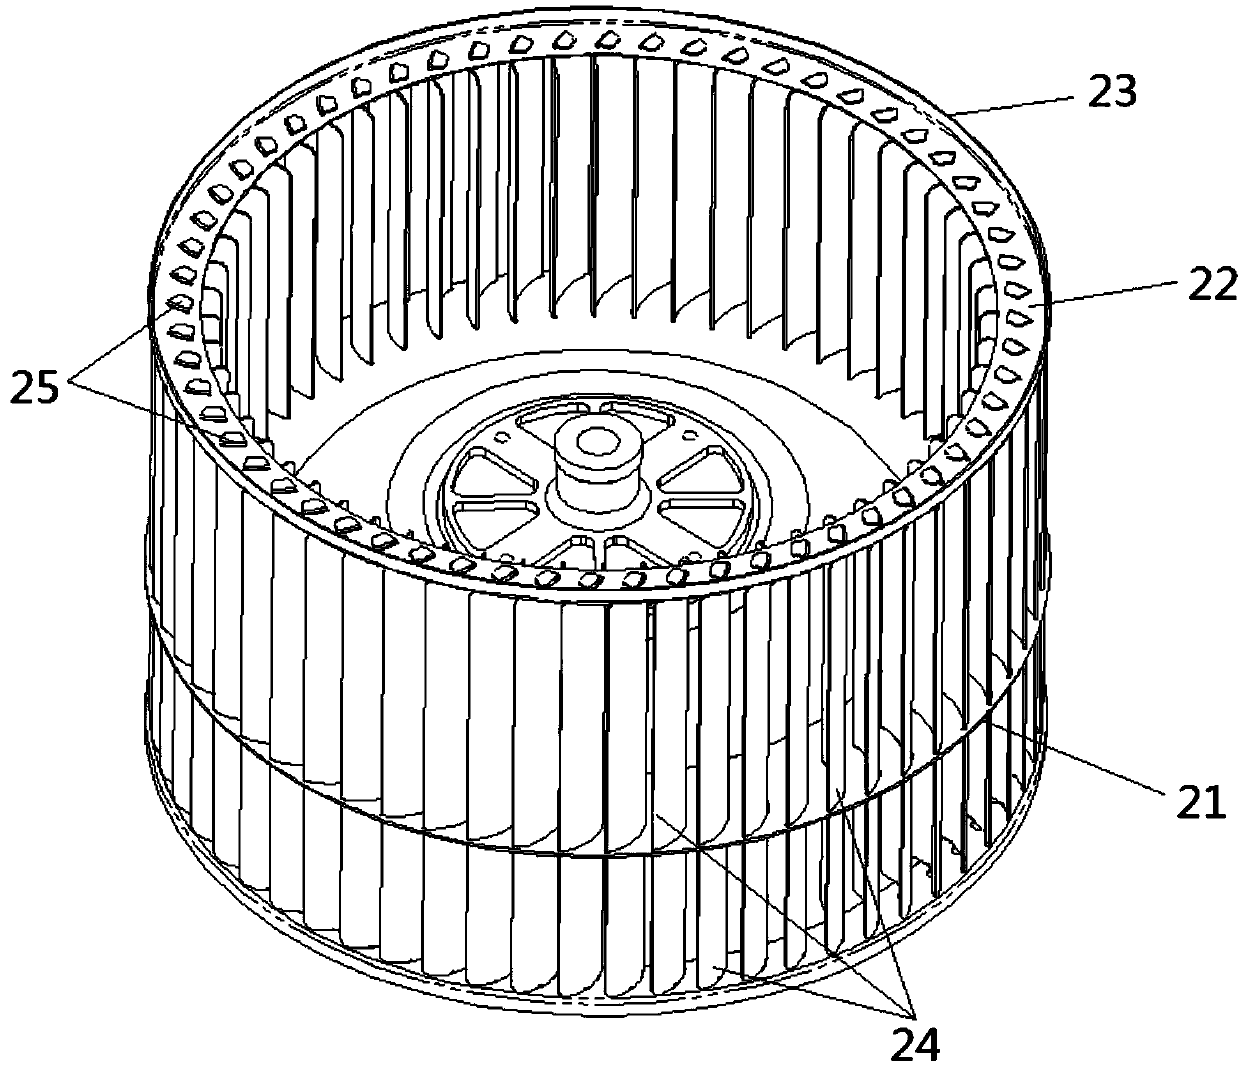 Wind inlet ring, wind wheel, draught fan structure and extractor hood